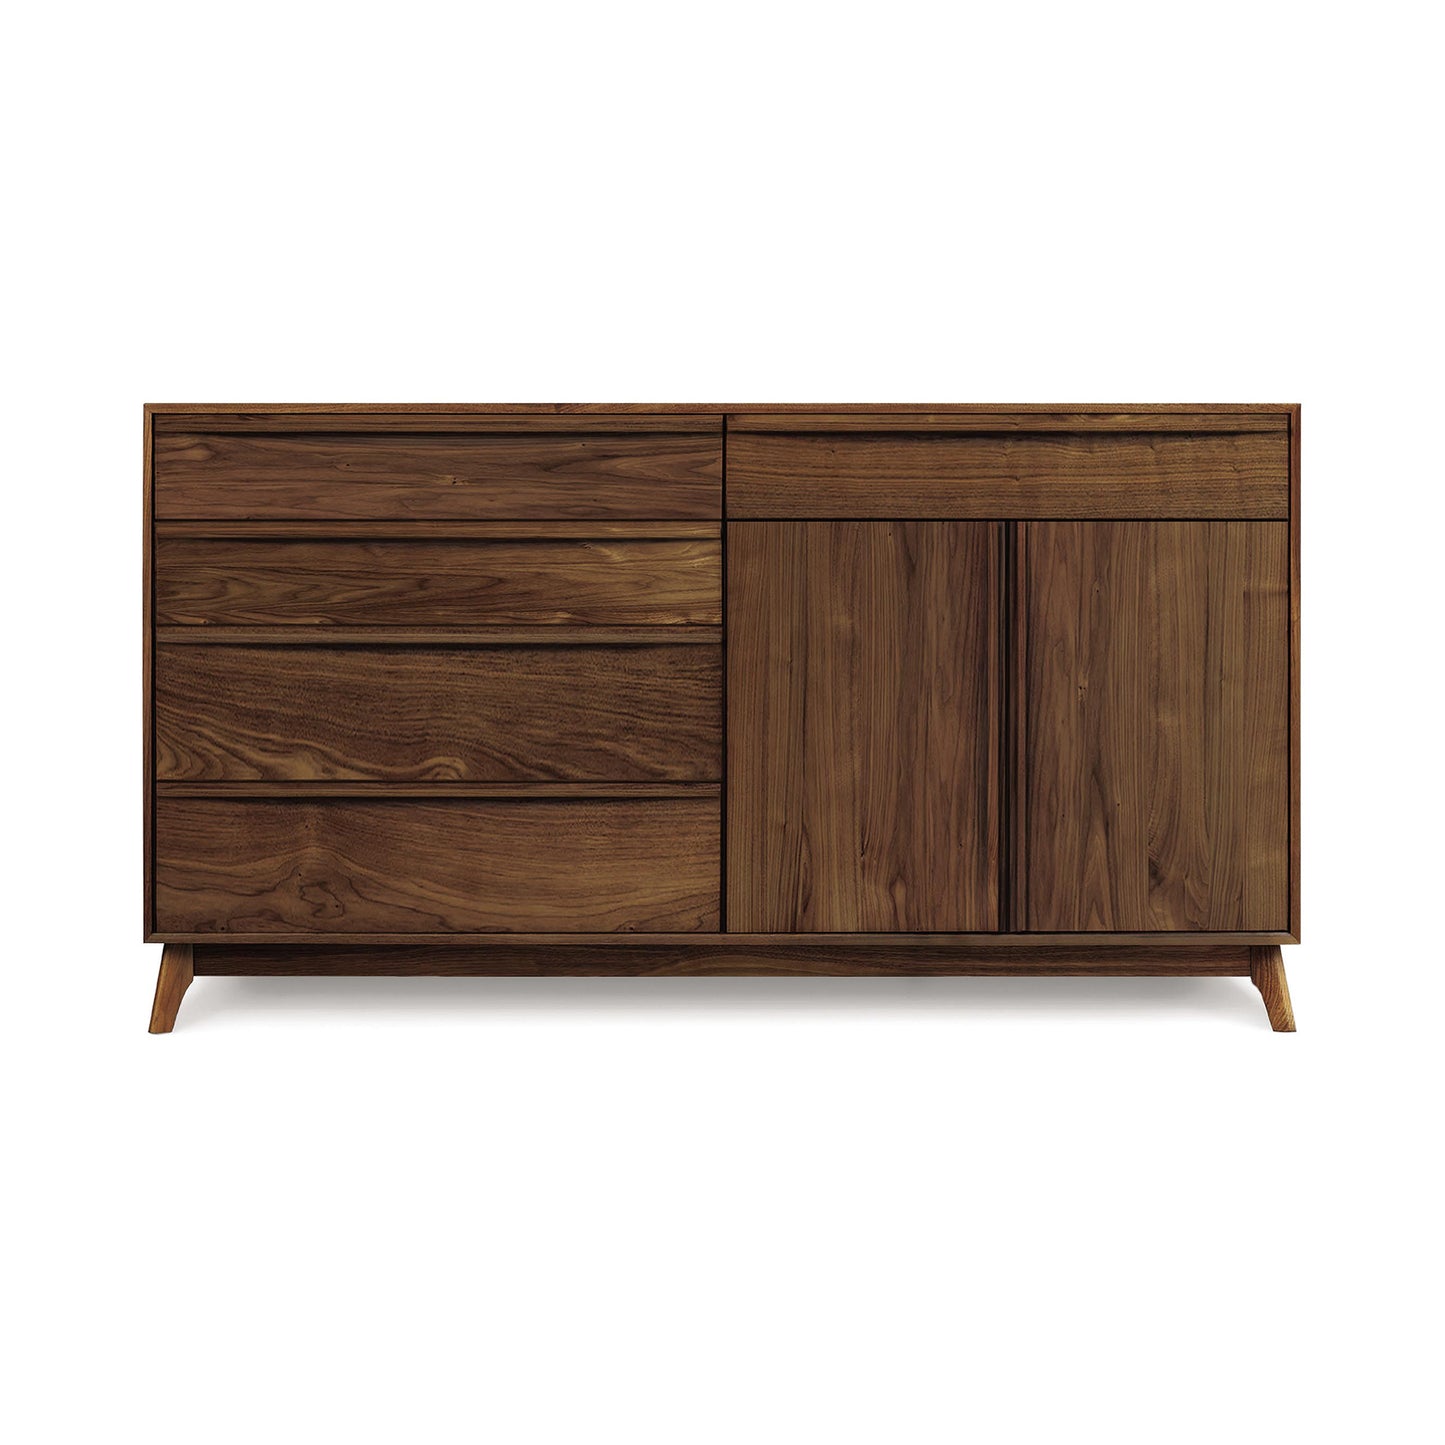 A Catalina 5-Drawer, 2-Door Buffet with two sections, featuring a clean and sleek design with tapered legs, isolated against a white background.